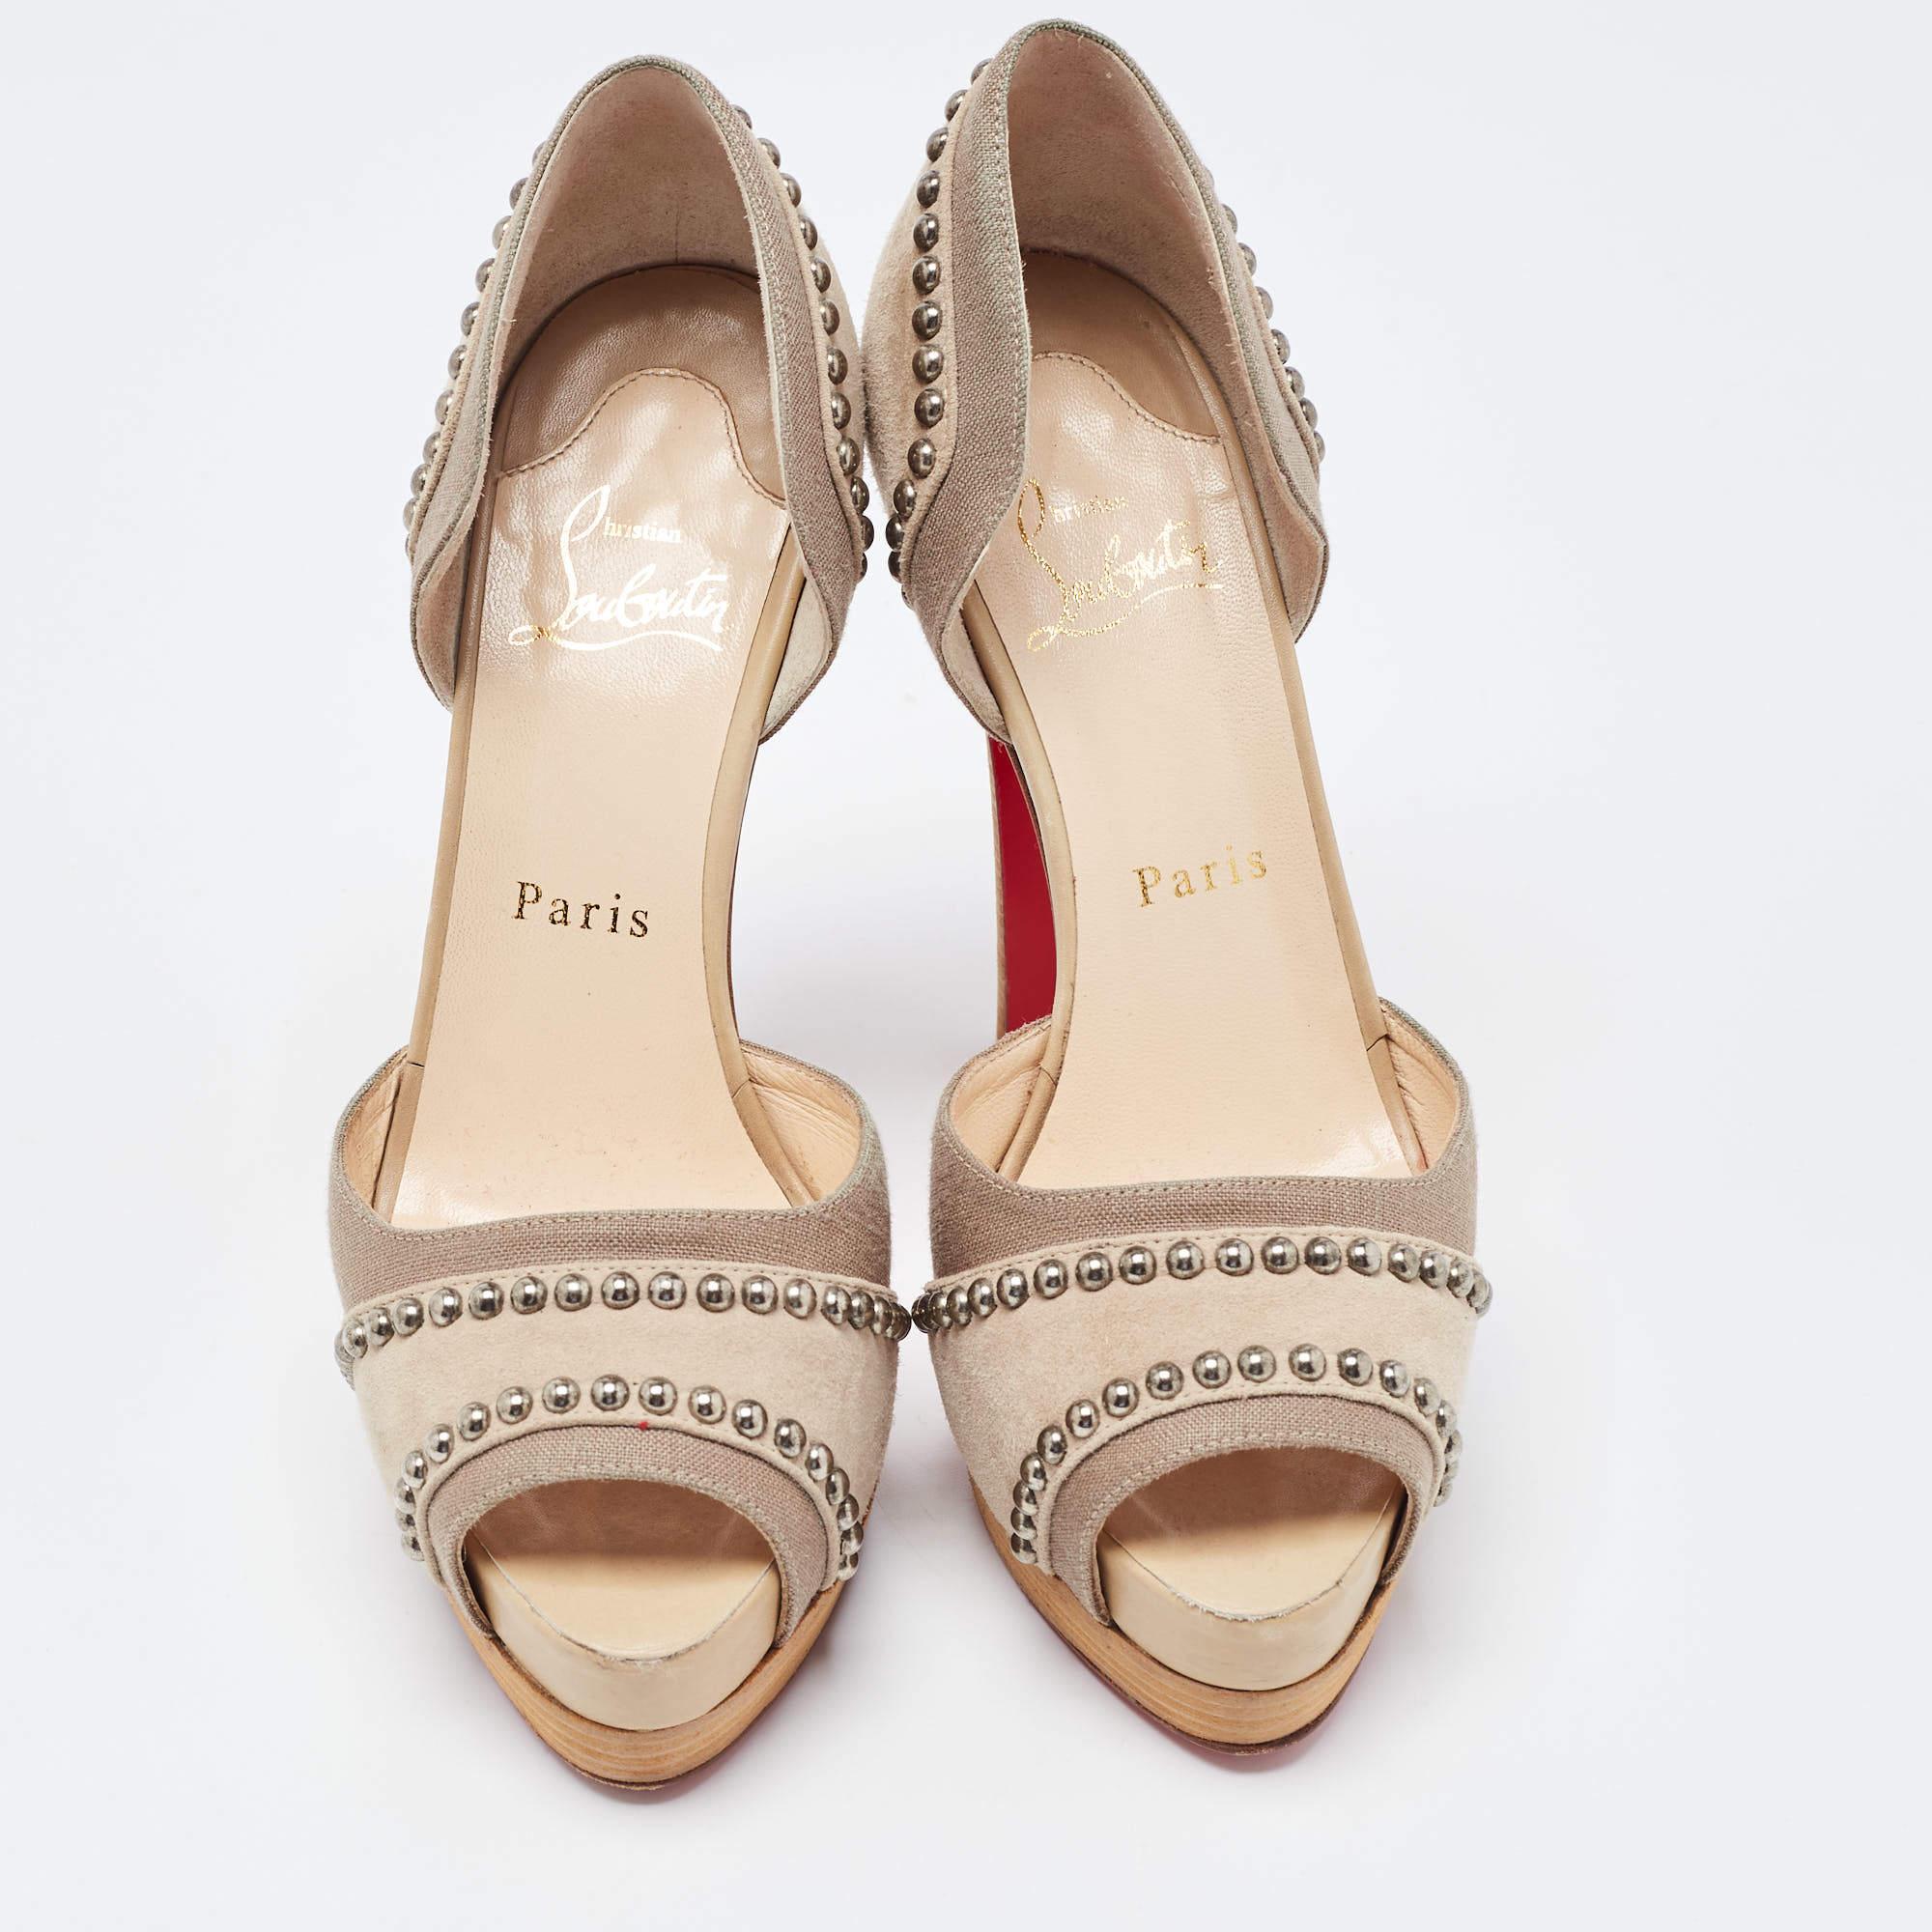 Christian Louboutin Two Tone Studded Suede and Canvas Peep Toe Platform D'orsay  In Good Condition For Sale In Dubai, Al Qouz 2